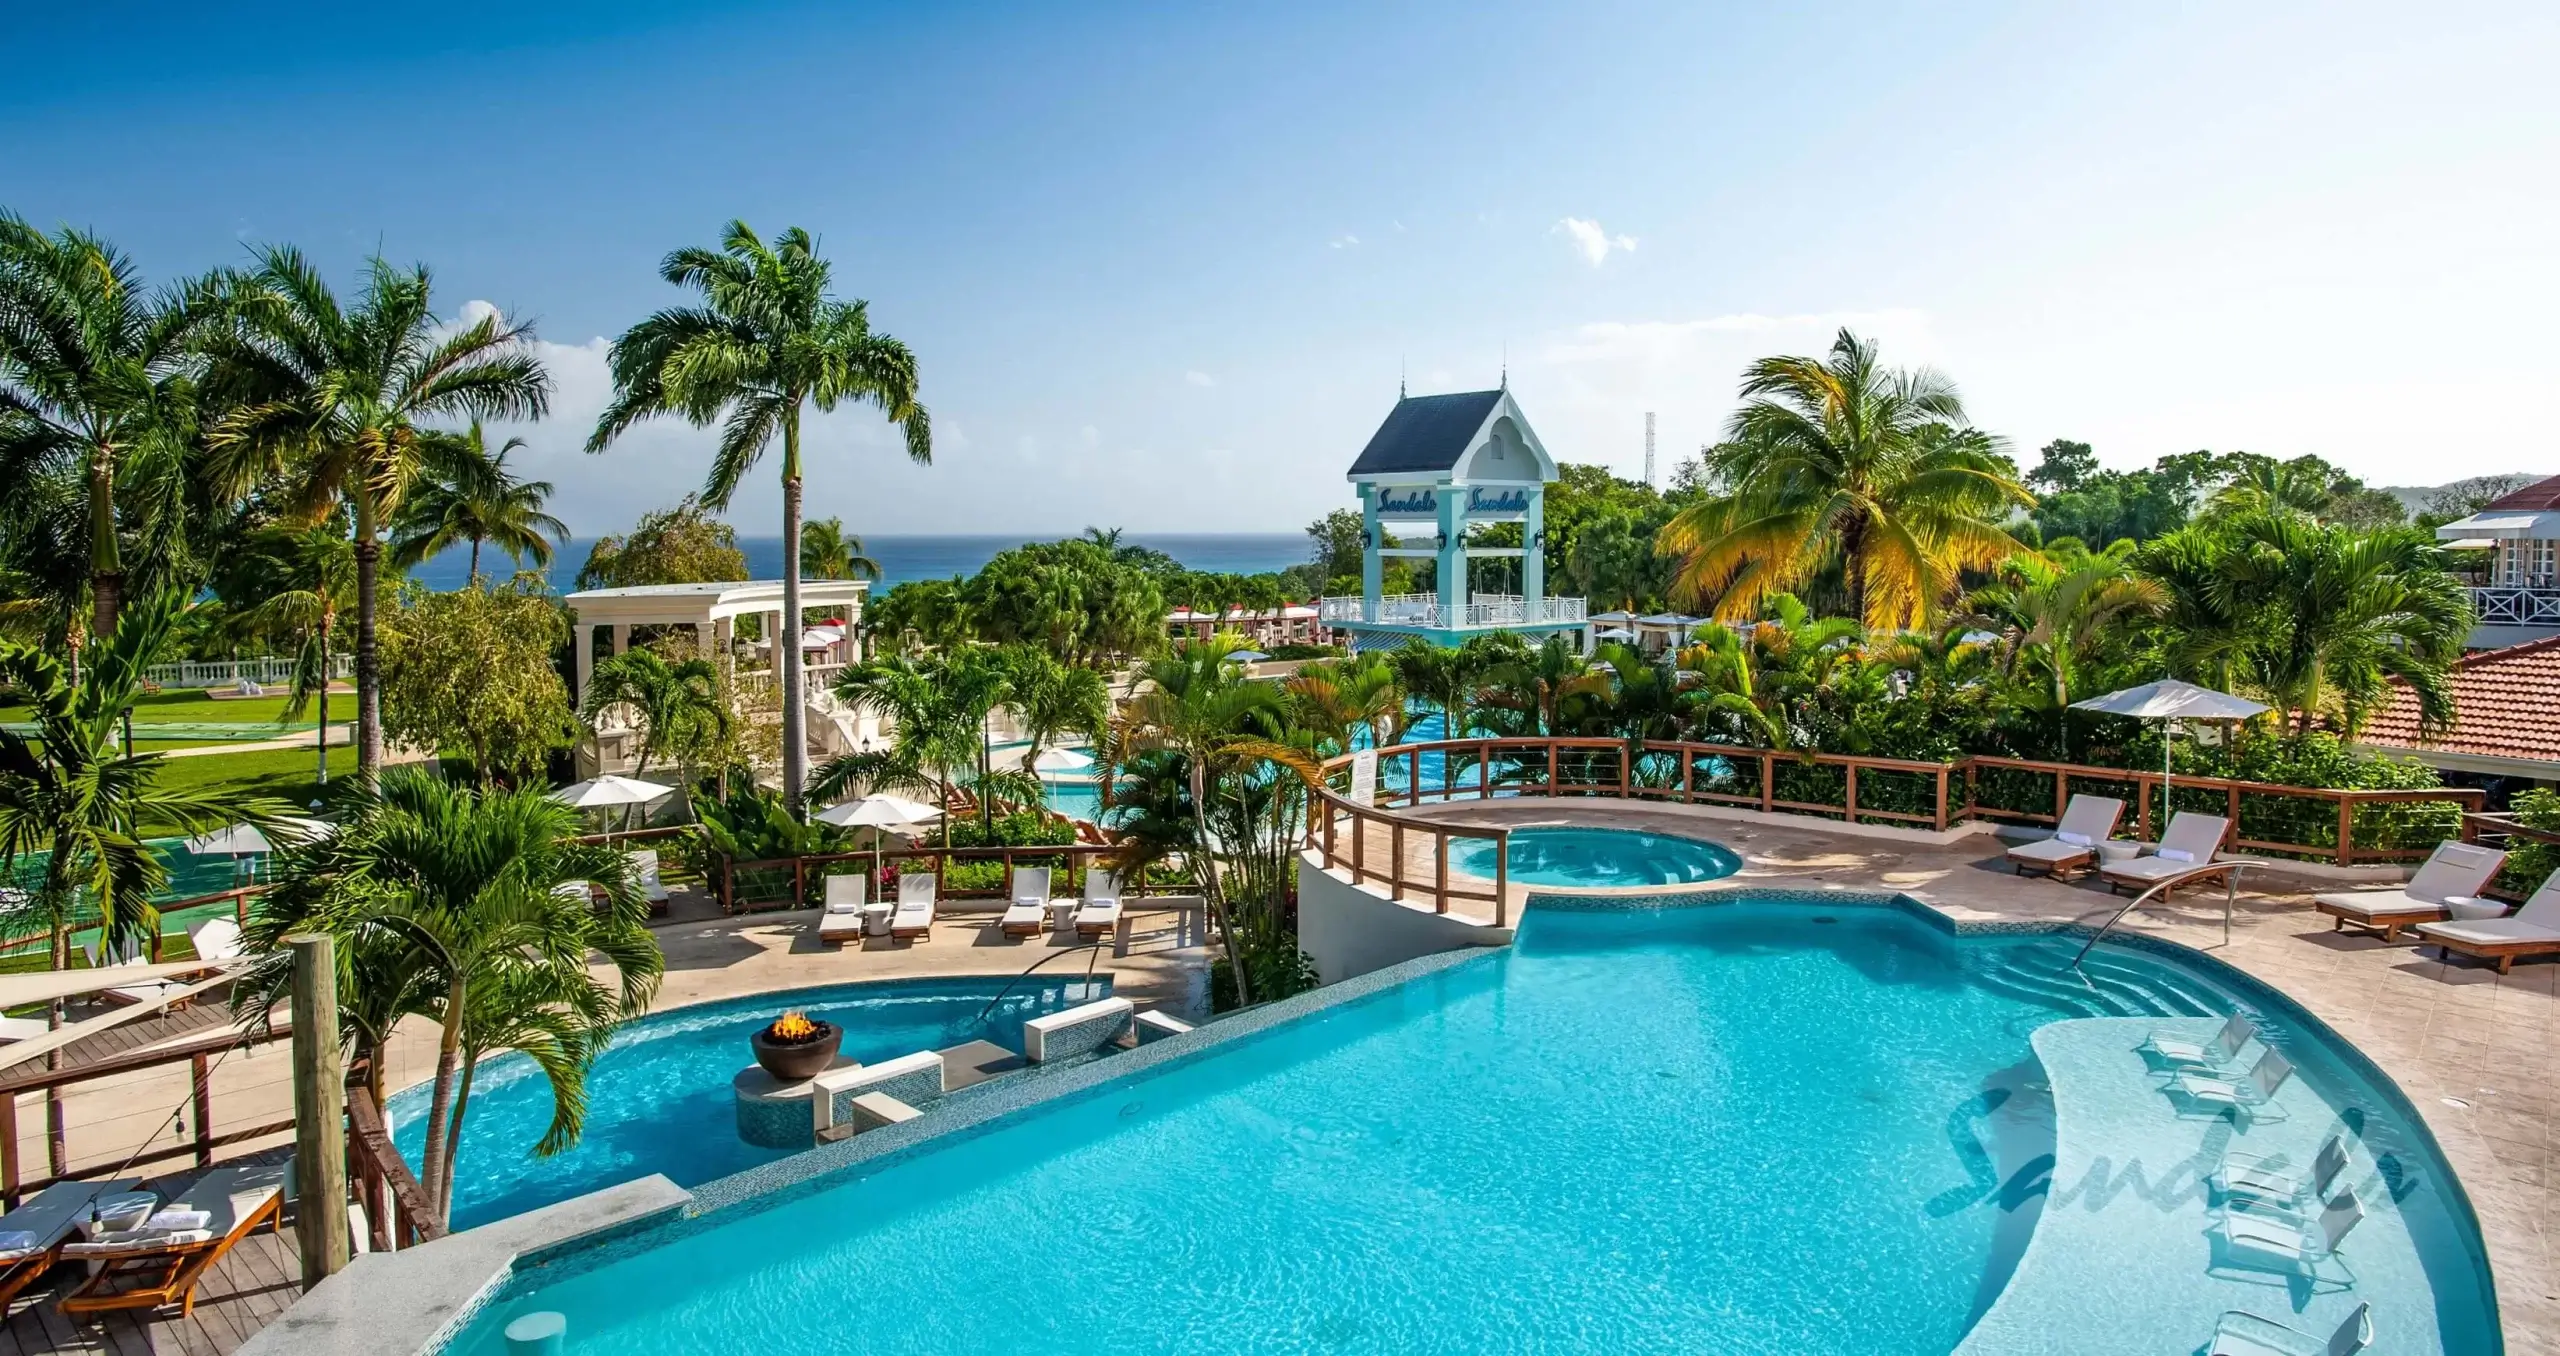 Sandals Ochi Resort with two large swimming pools and palm trees.